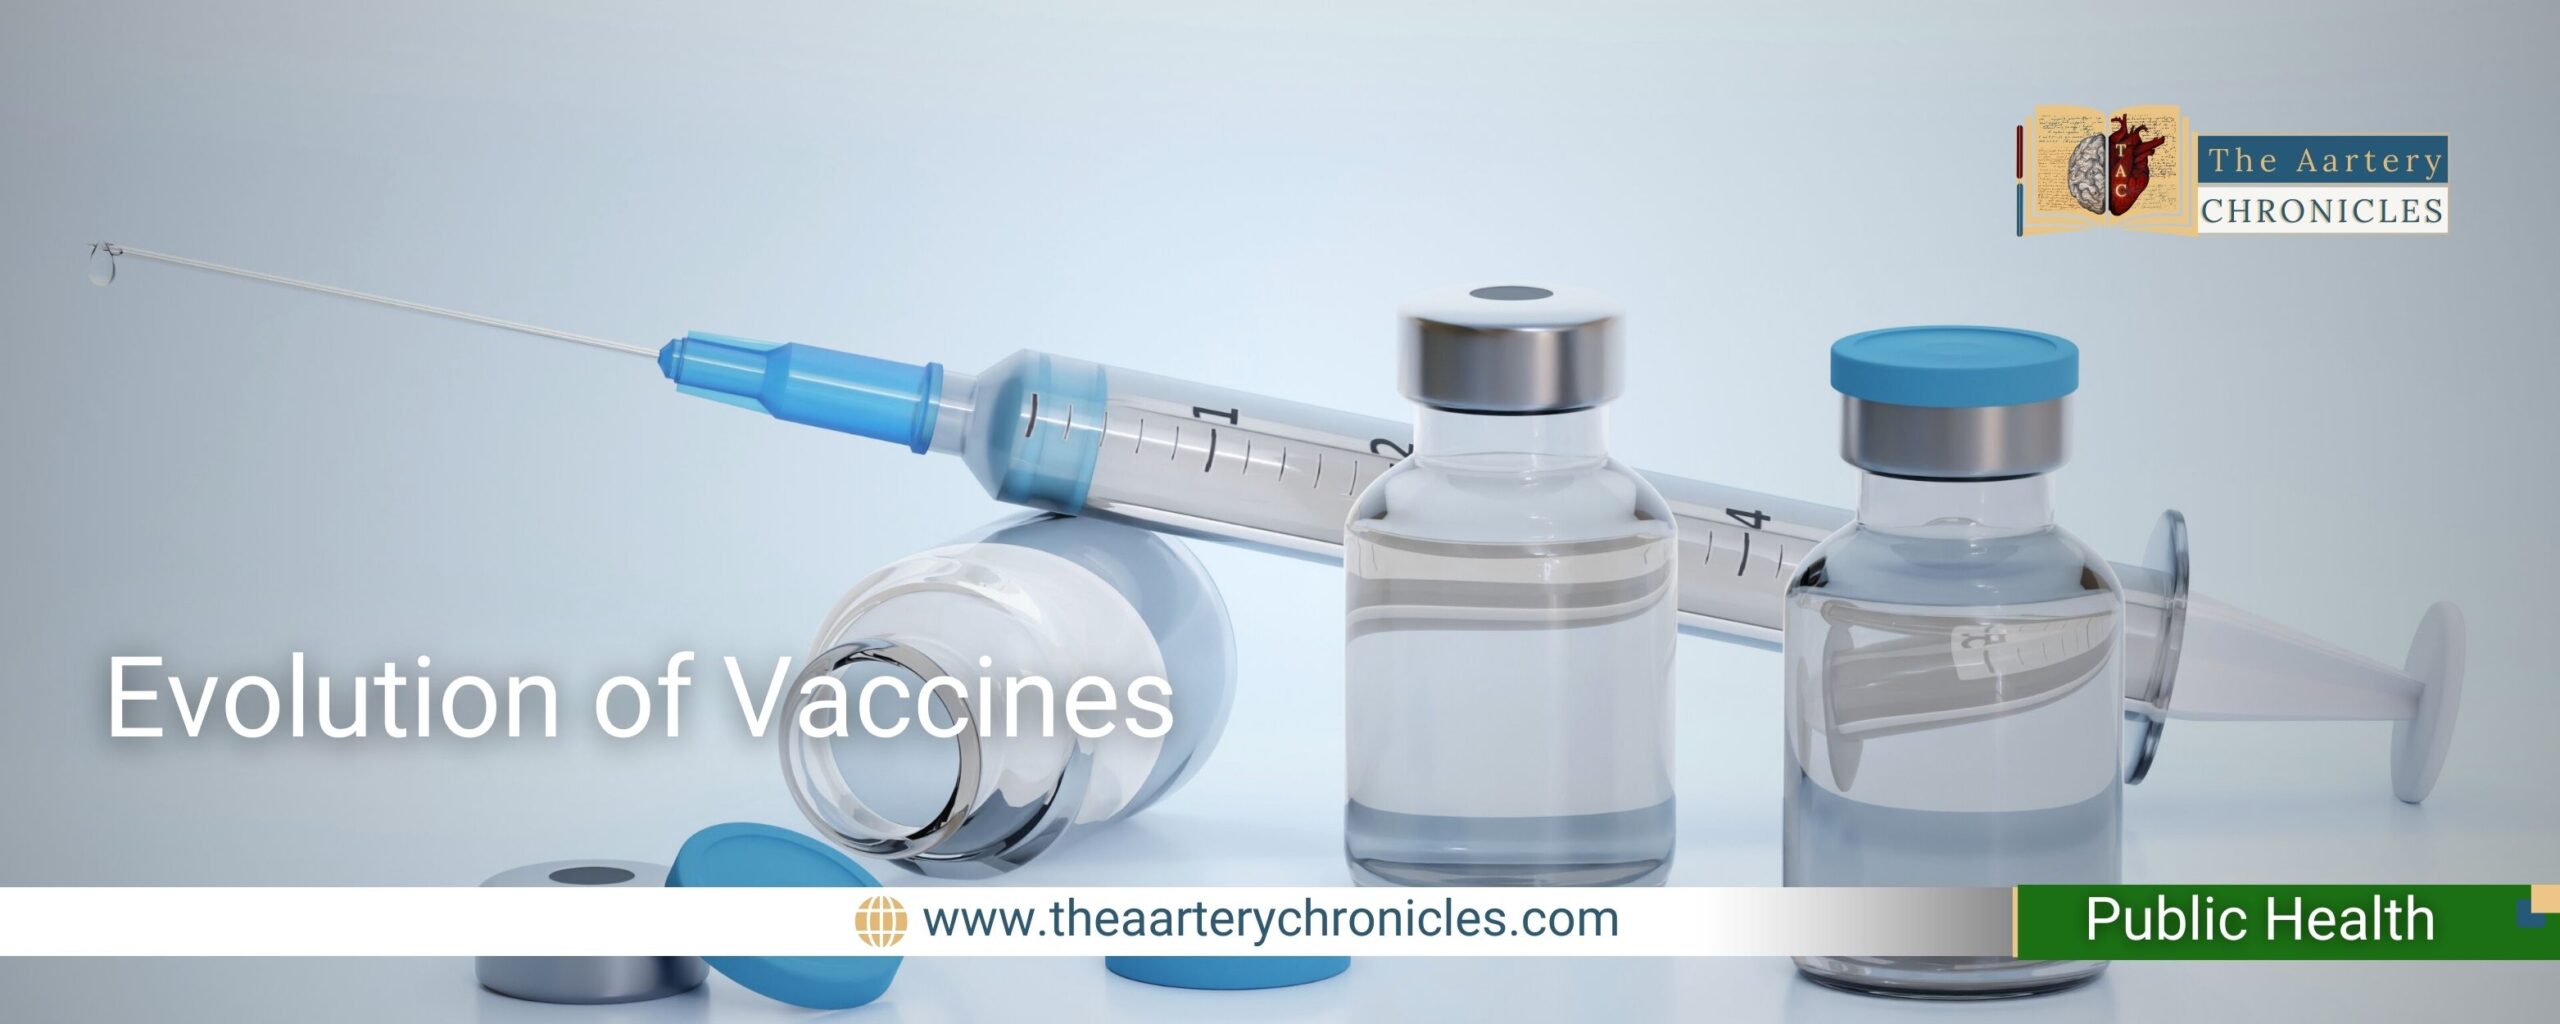 Evolution-of-Vaccines-the-aartery-chronicles-tac